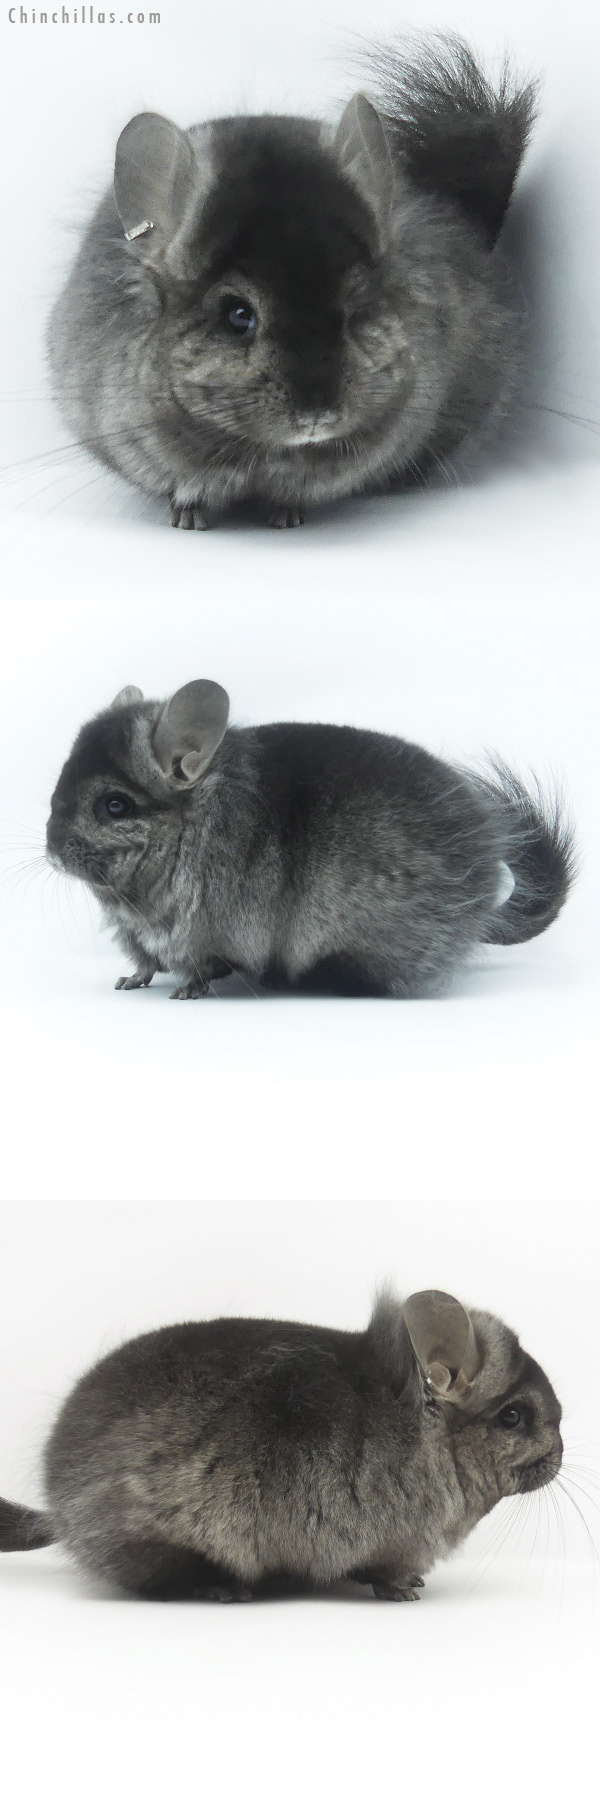 Chinchilla or related item offered for sale or export on Chinchillas.com - 19476 Ebony ( Locken Carrier )  Royal Persian Angora Female Chinchilla